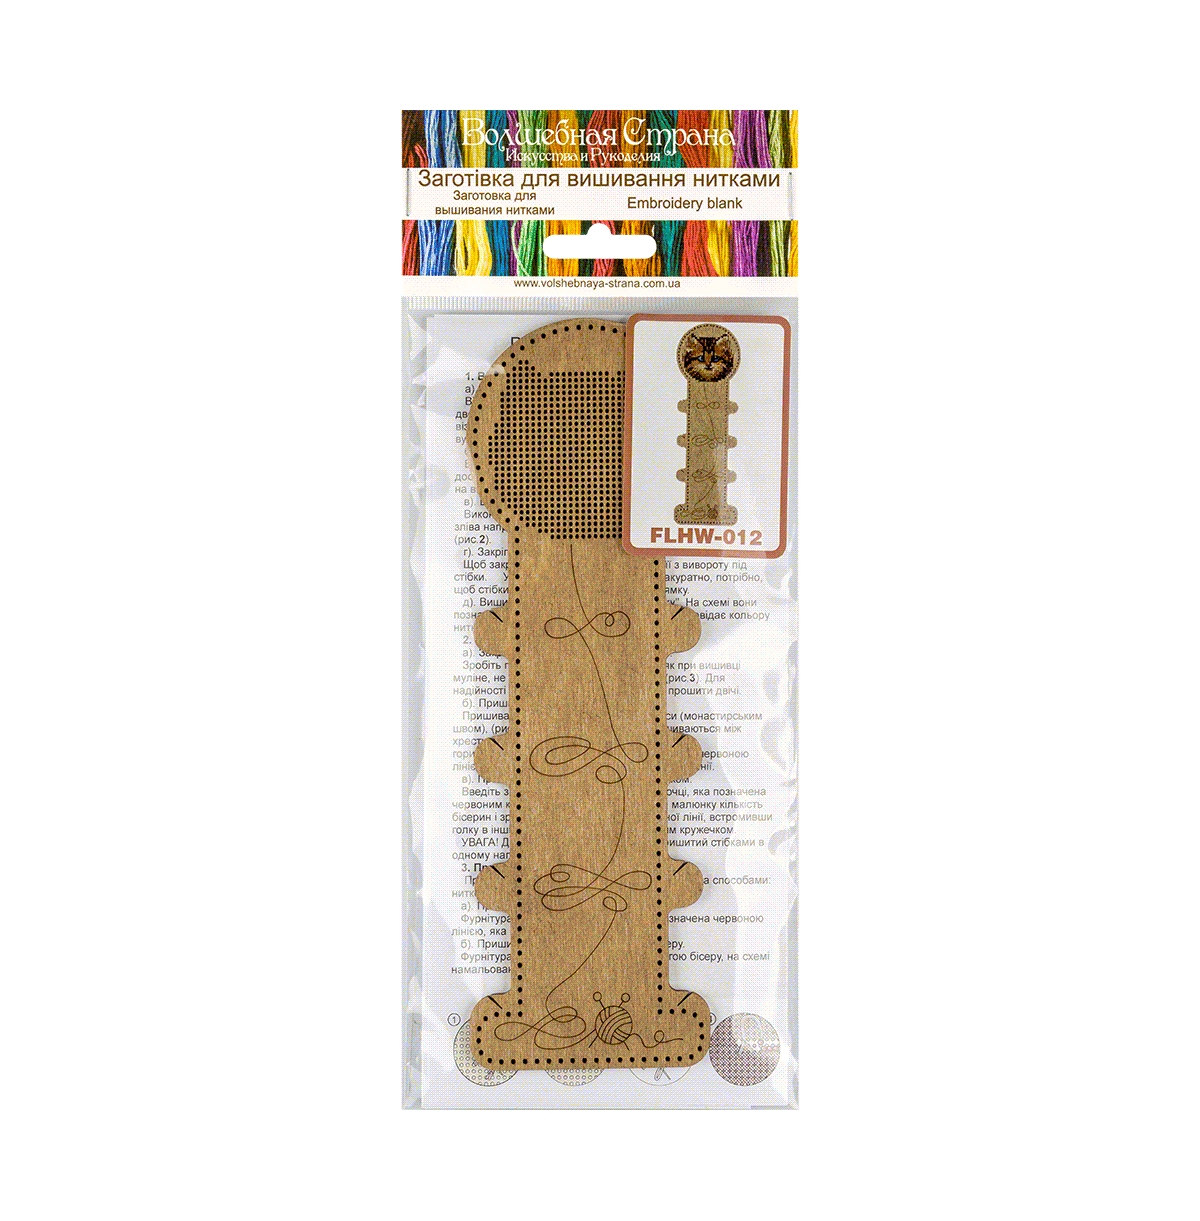 Blank for embroidery with thread on wood Flhw-012 - Assorted Pre-pack (See Table